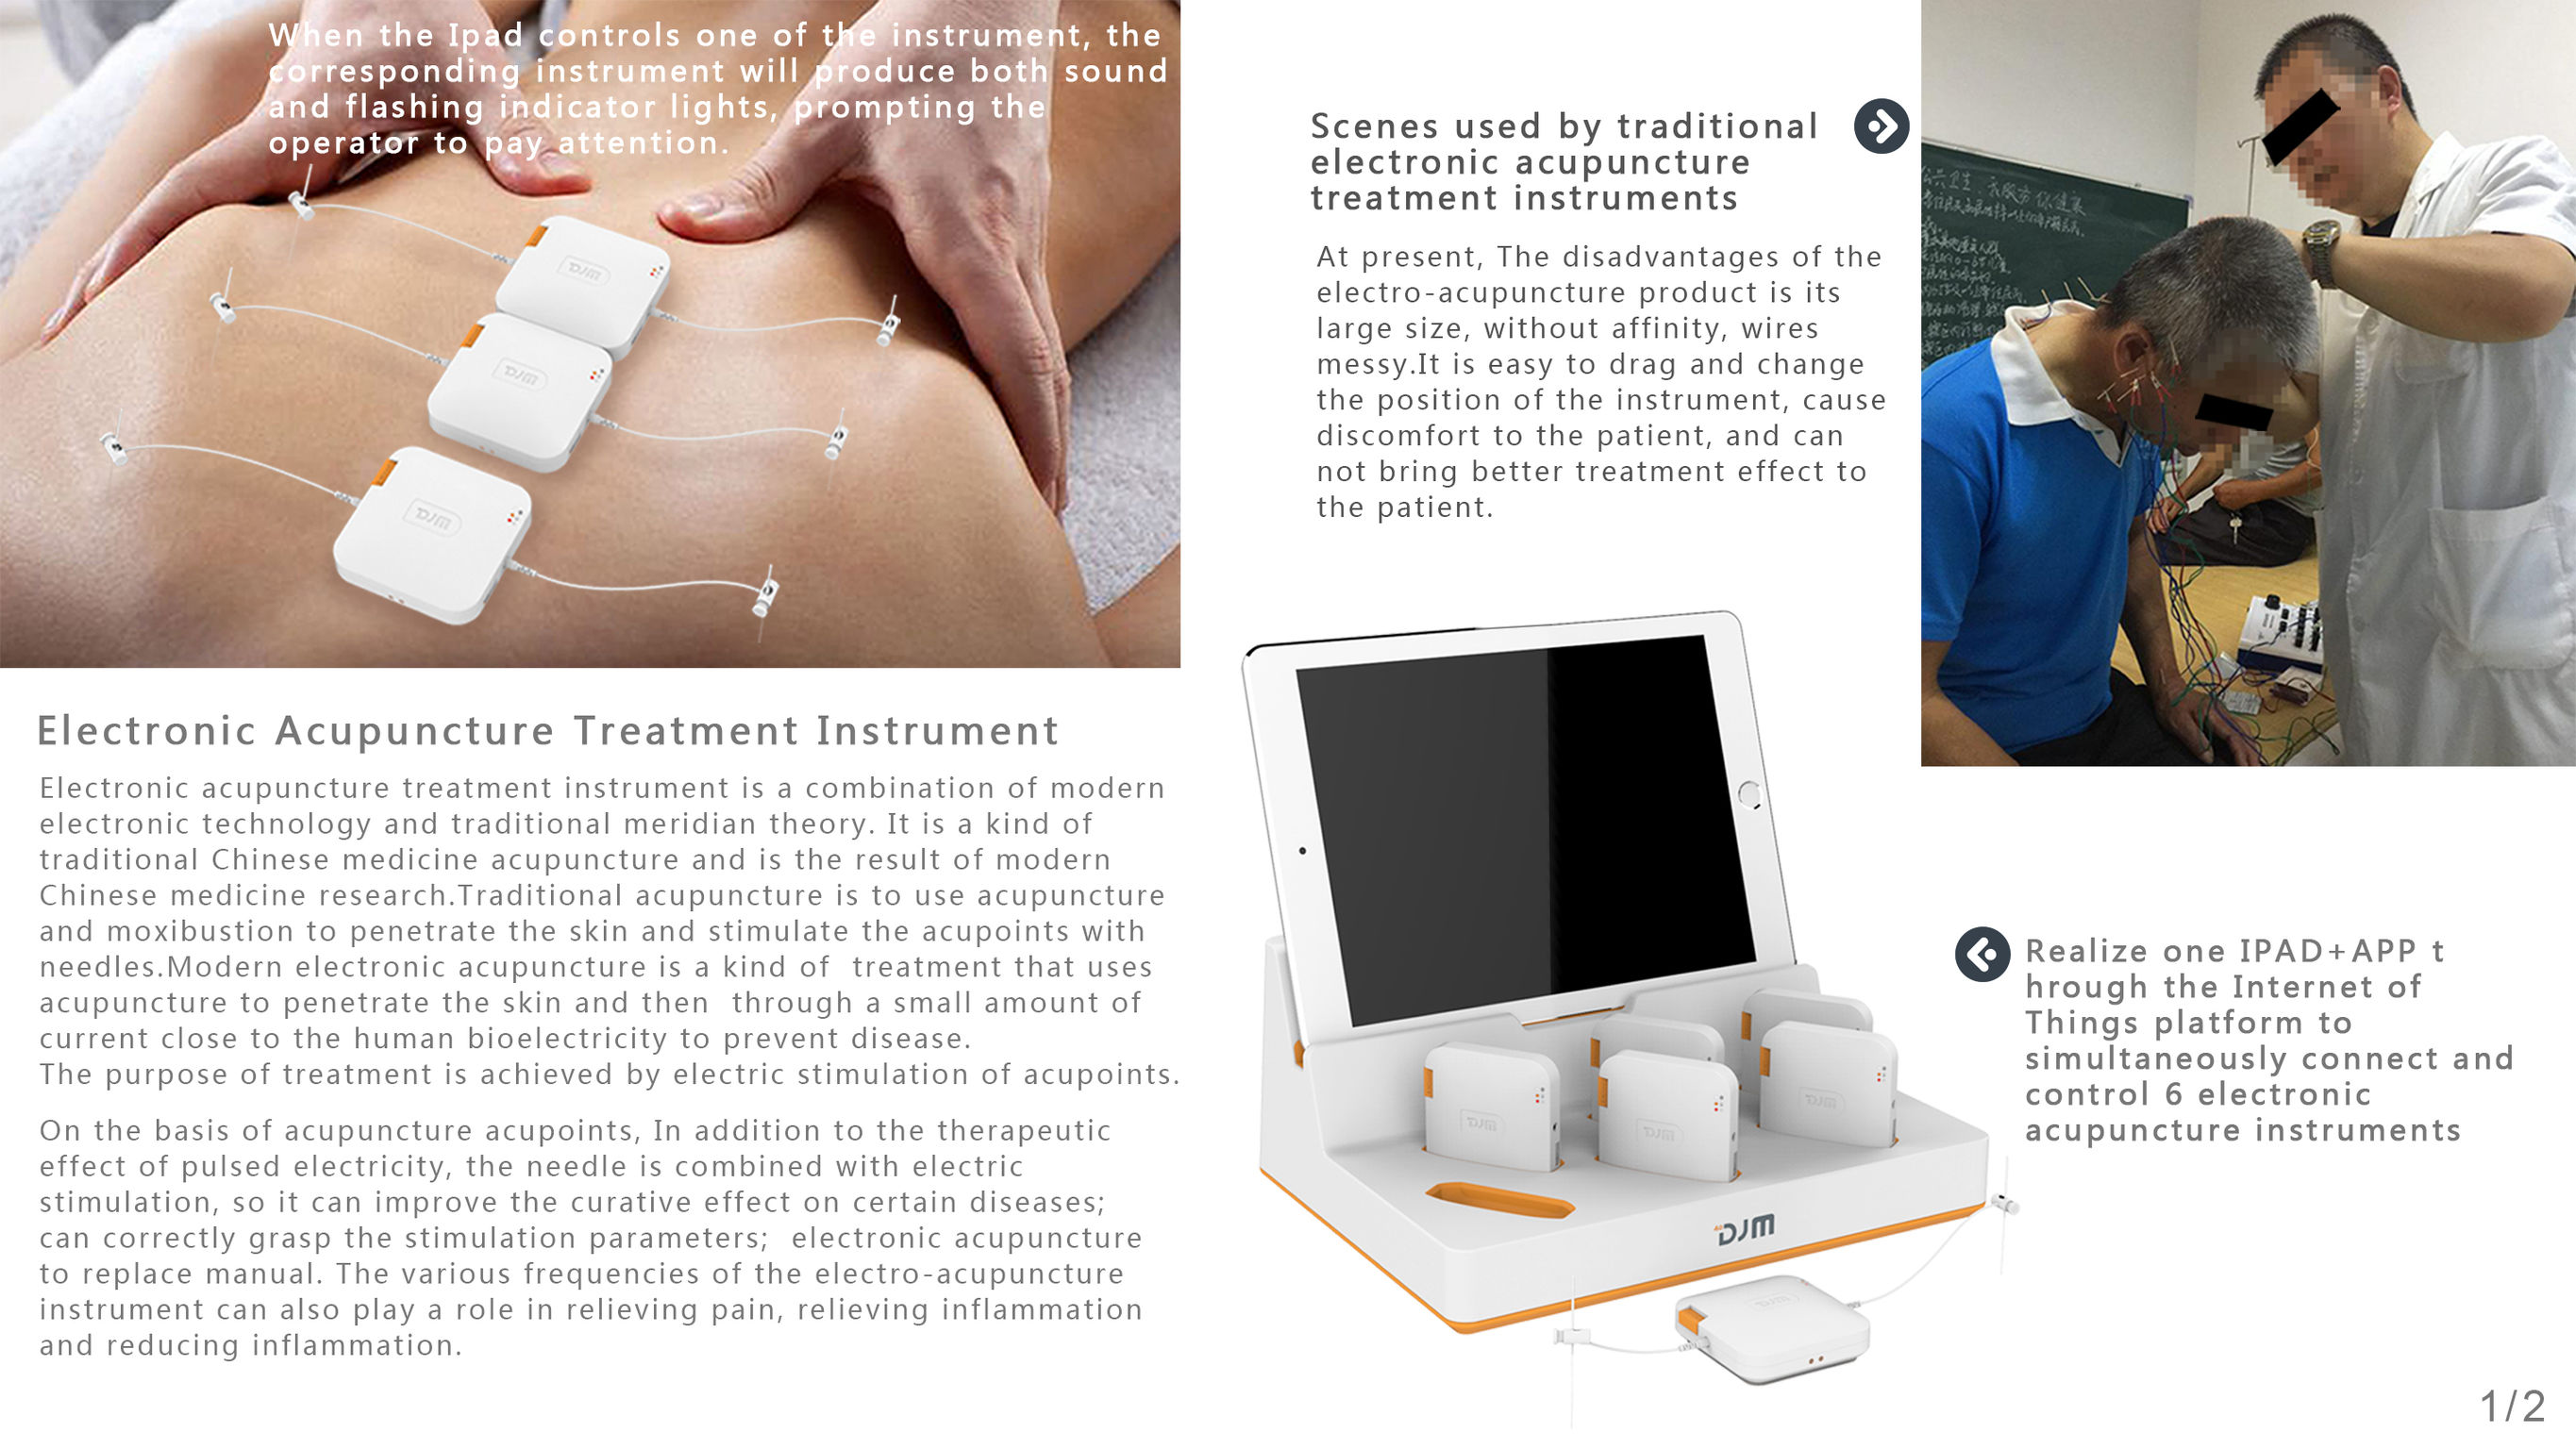 Electronic Acupuncture Treatment Instrument